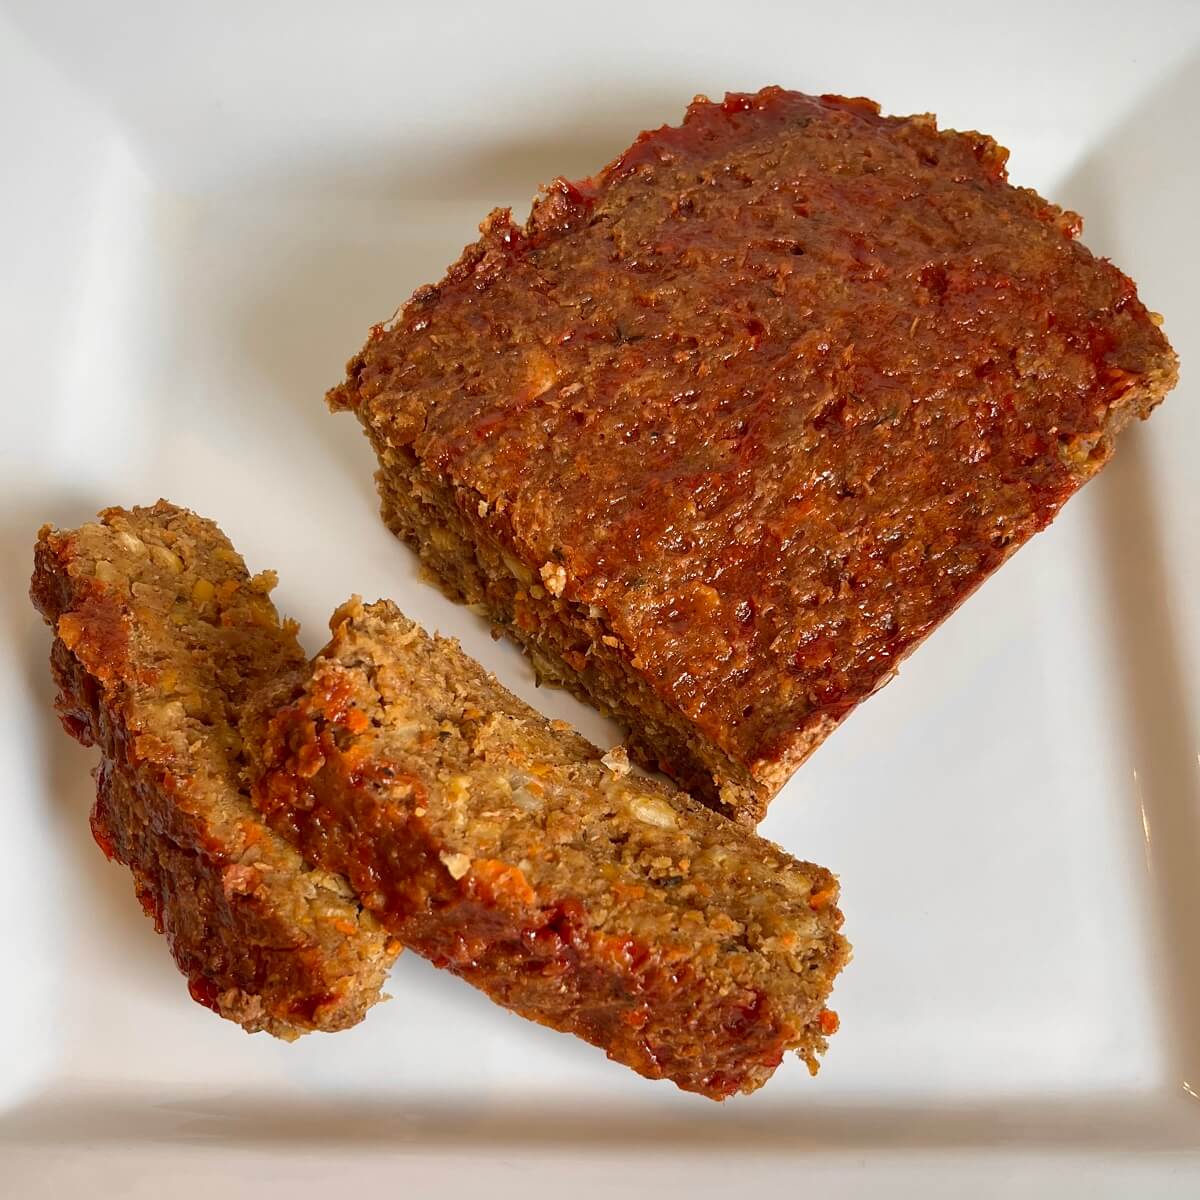 Meatless meatloaf on a plate with two thick slices cut.